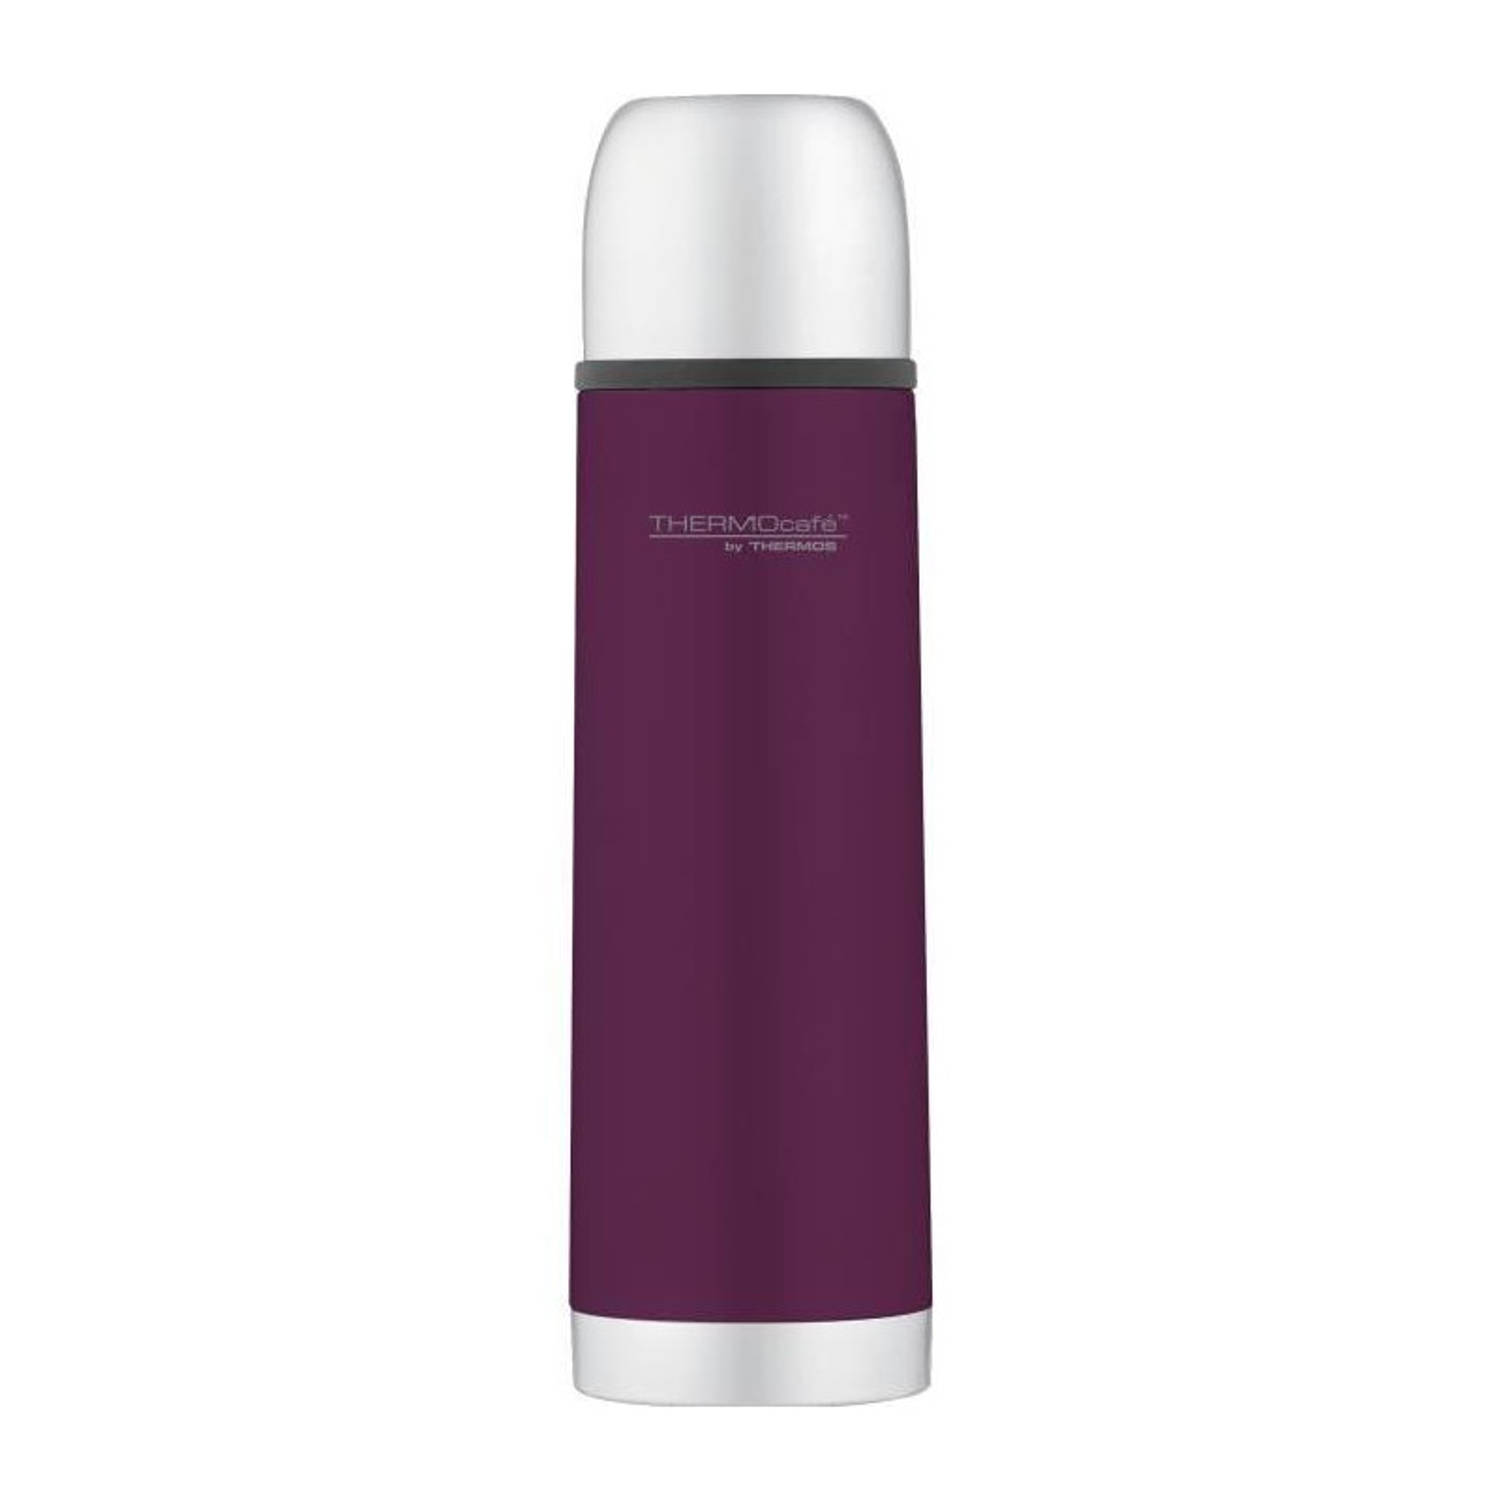 Thermos Soft Touch RVS Isoleerfles - 0.5L - Paars